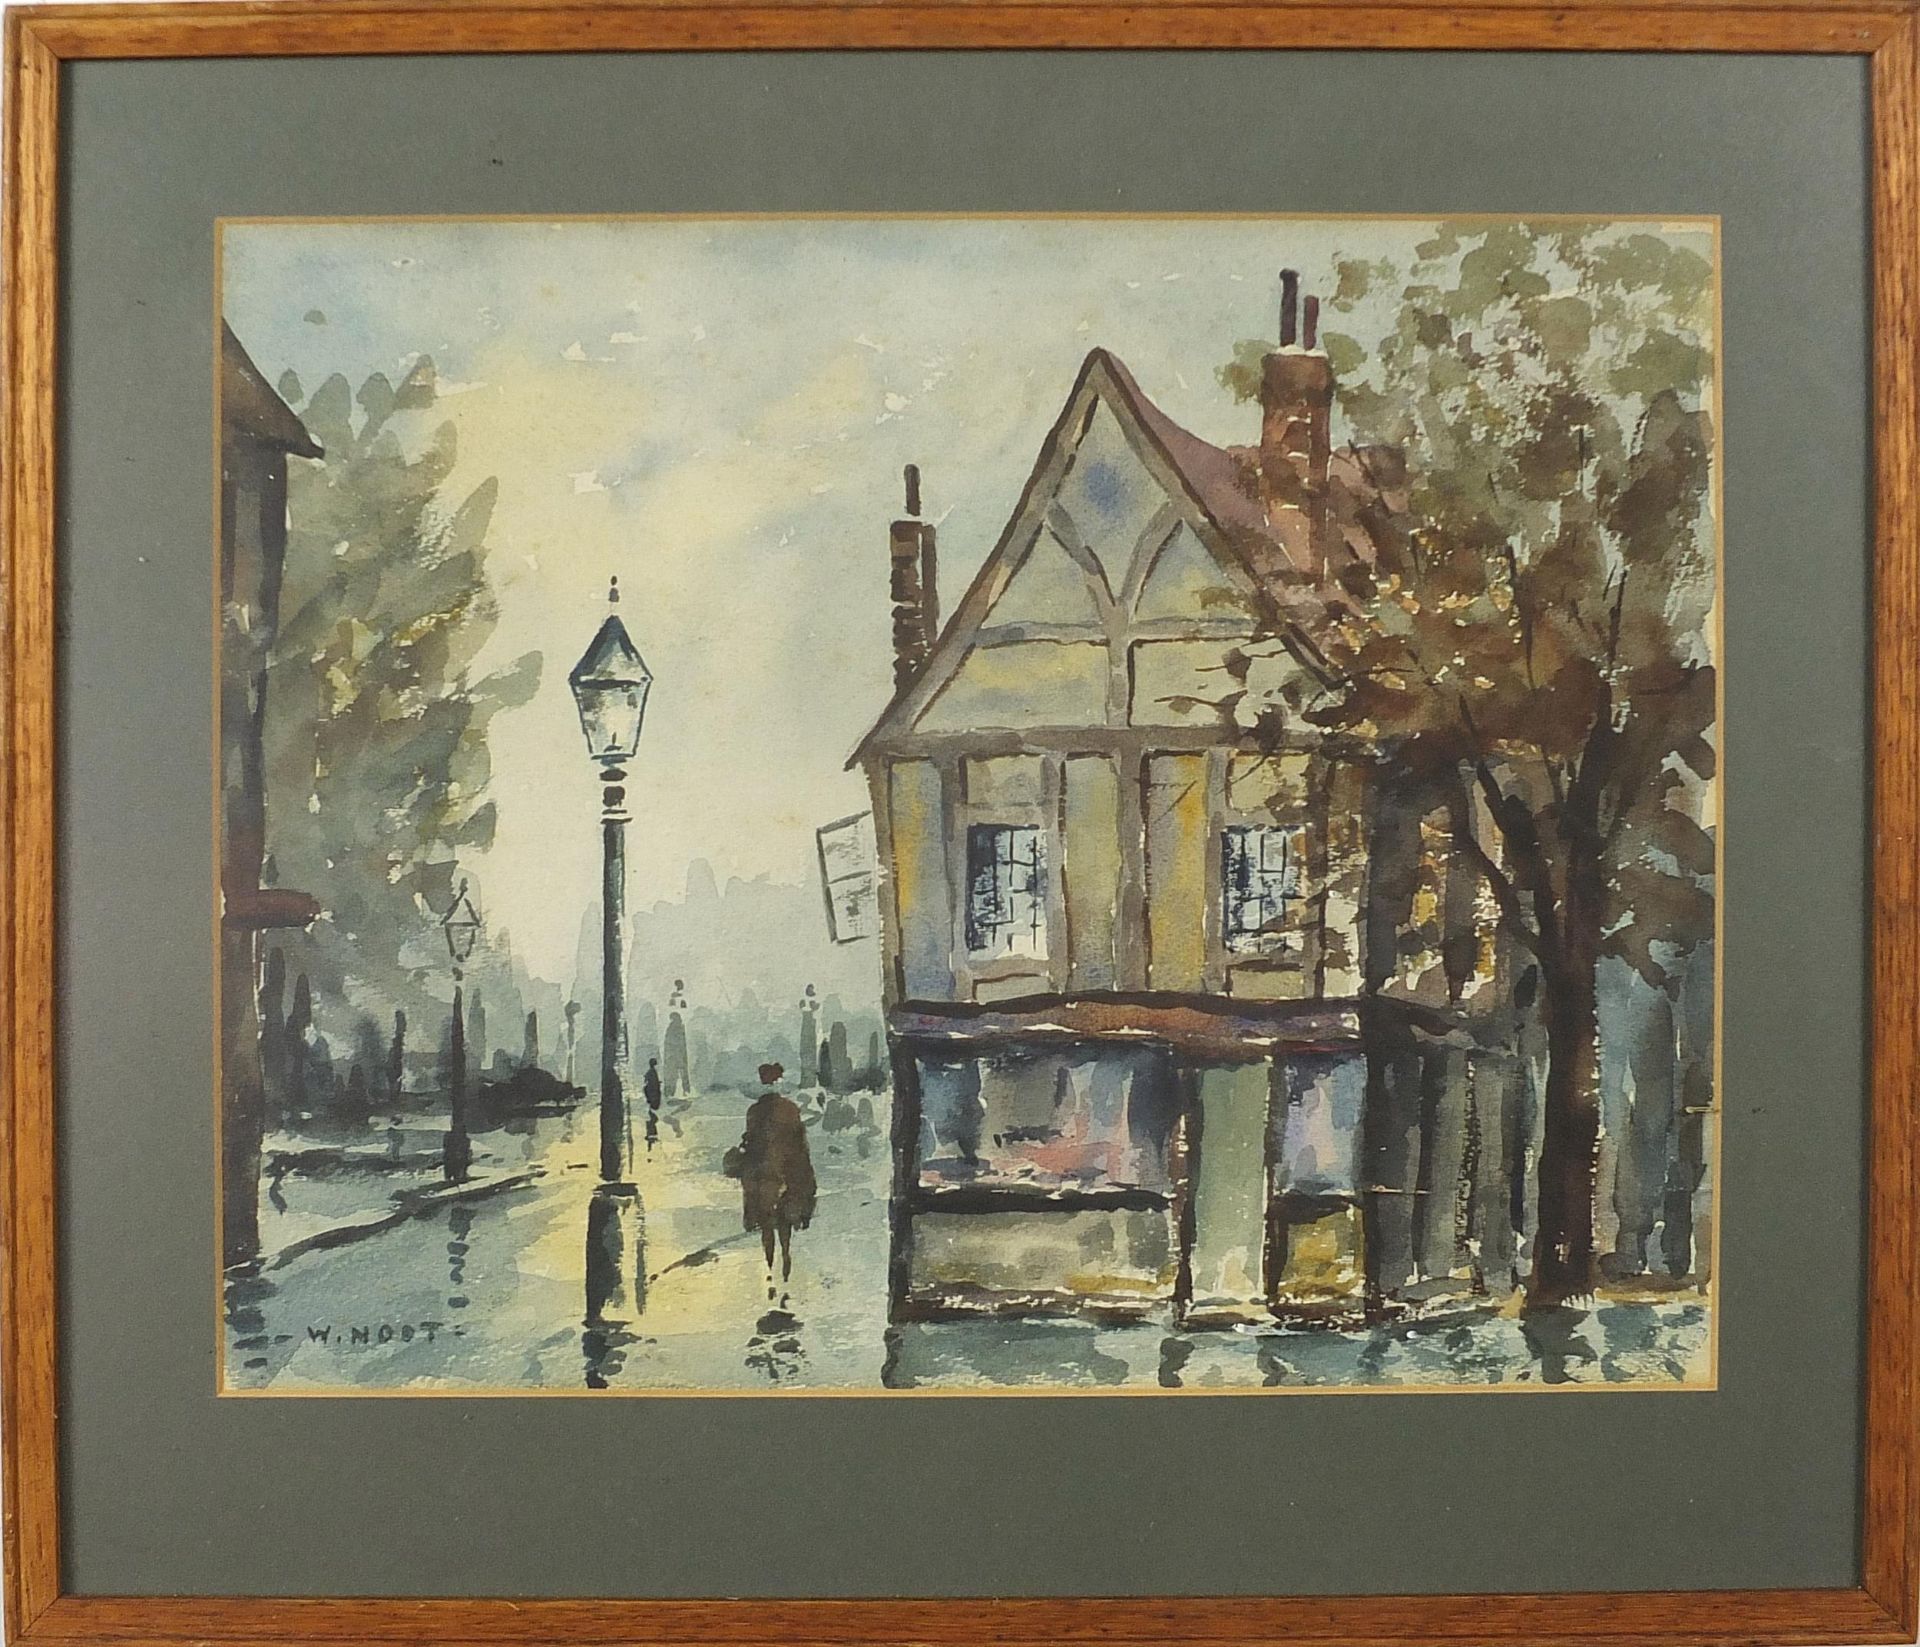 W Noot - The Old Curiosity Shop and Street scene with figures, pair of watercolours, mounted, framed - Image 7 of 9